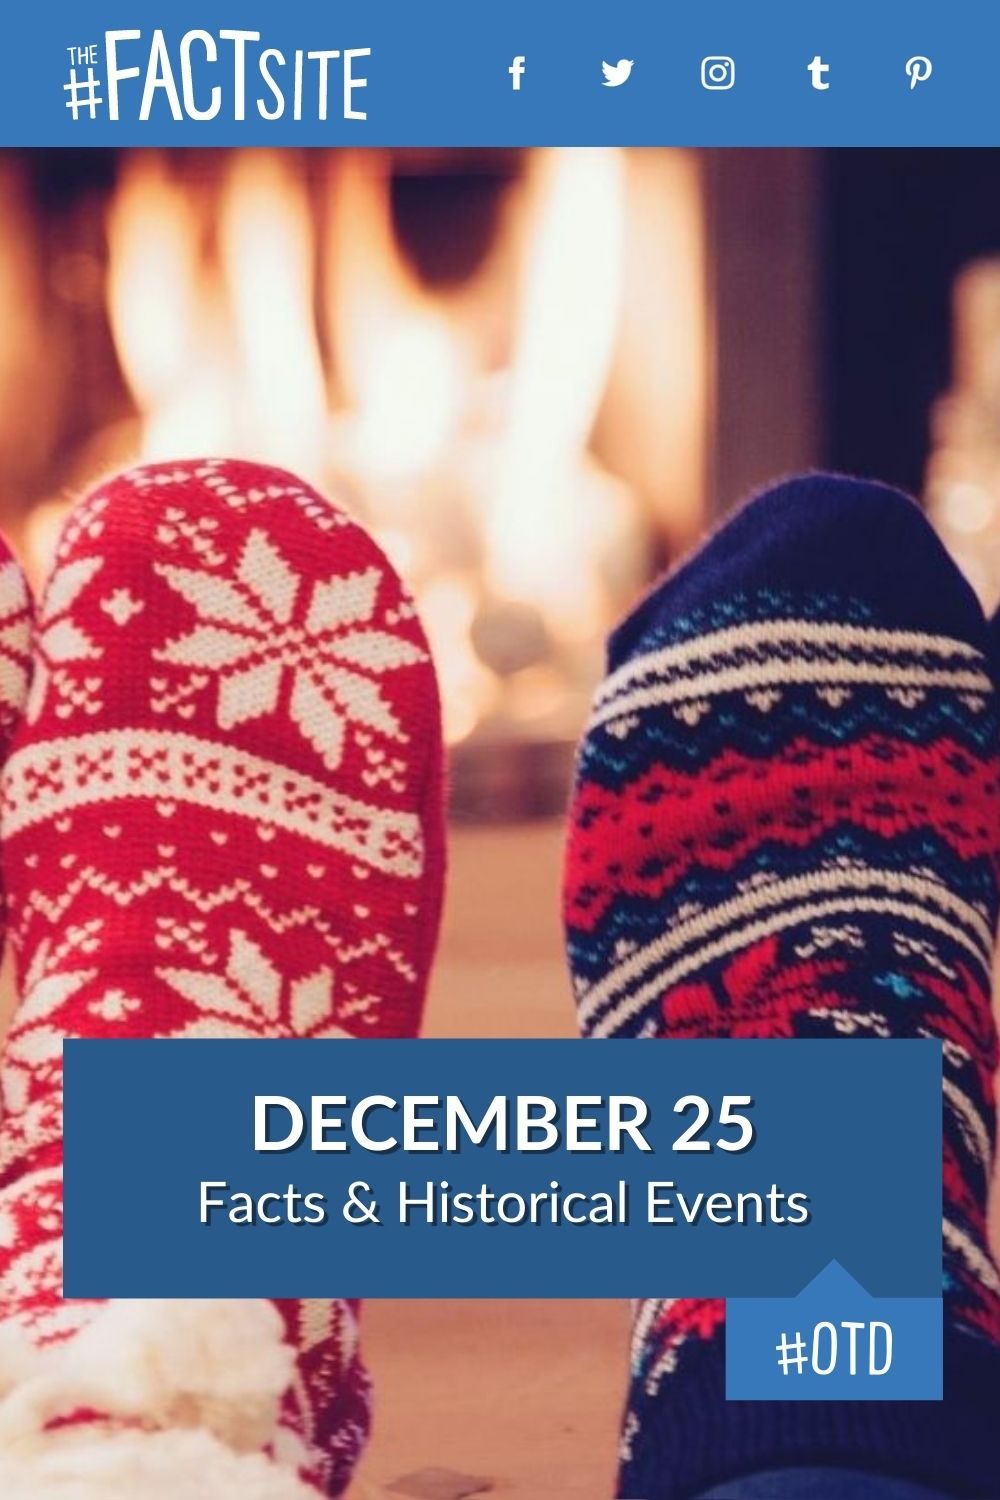 Facts & Historic Events That Happened on December 25